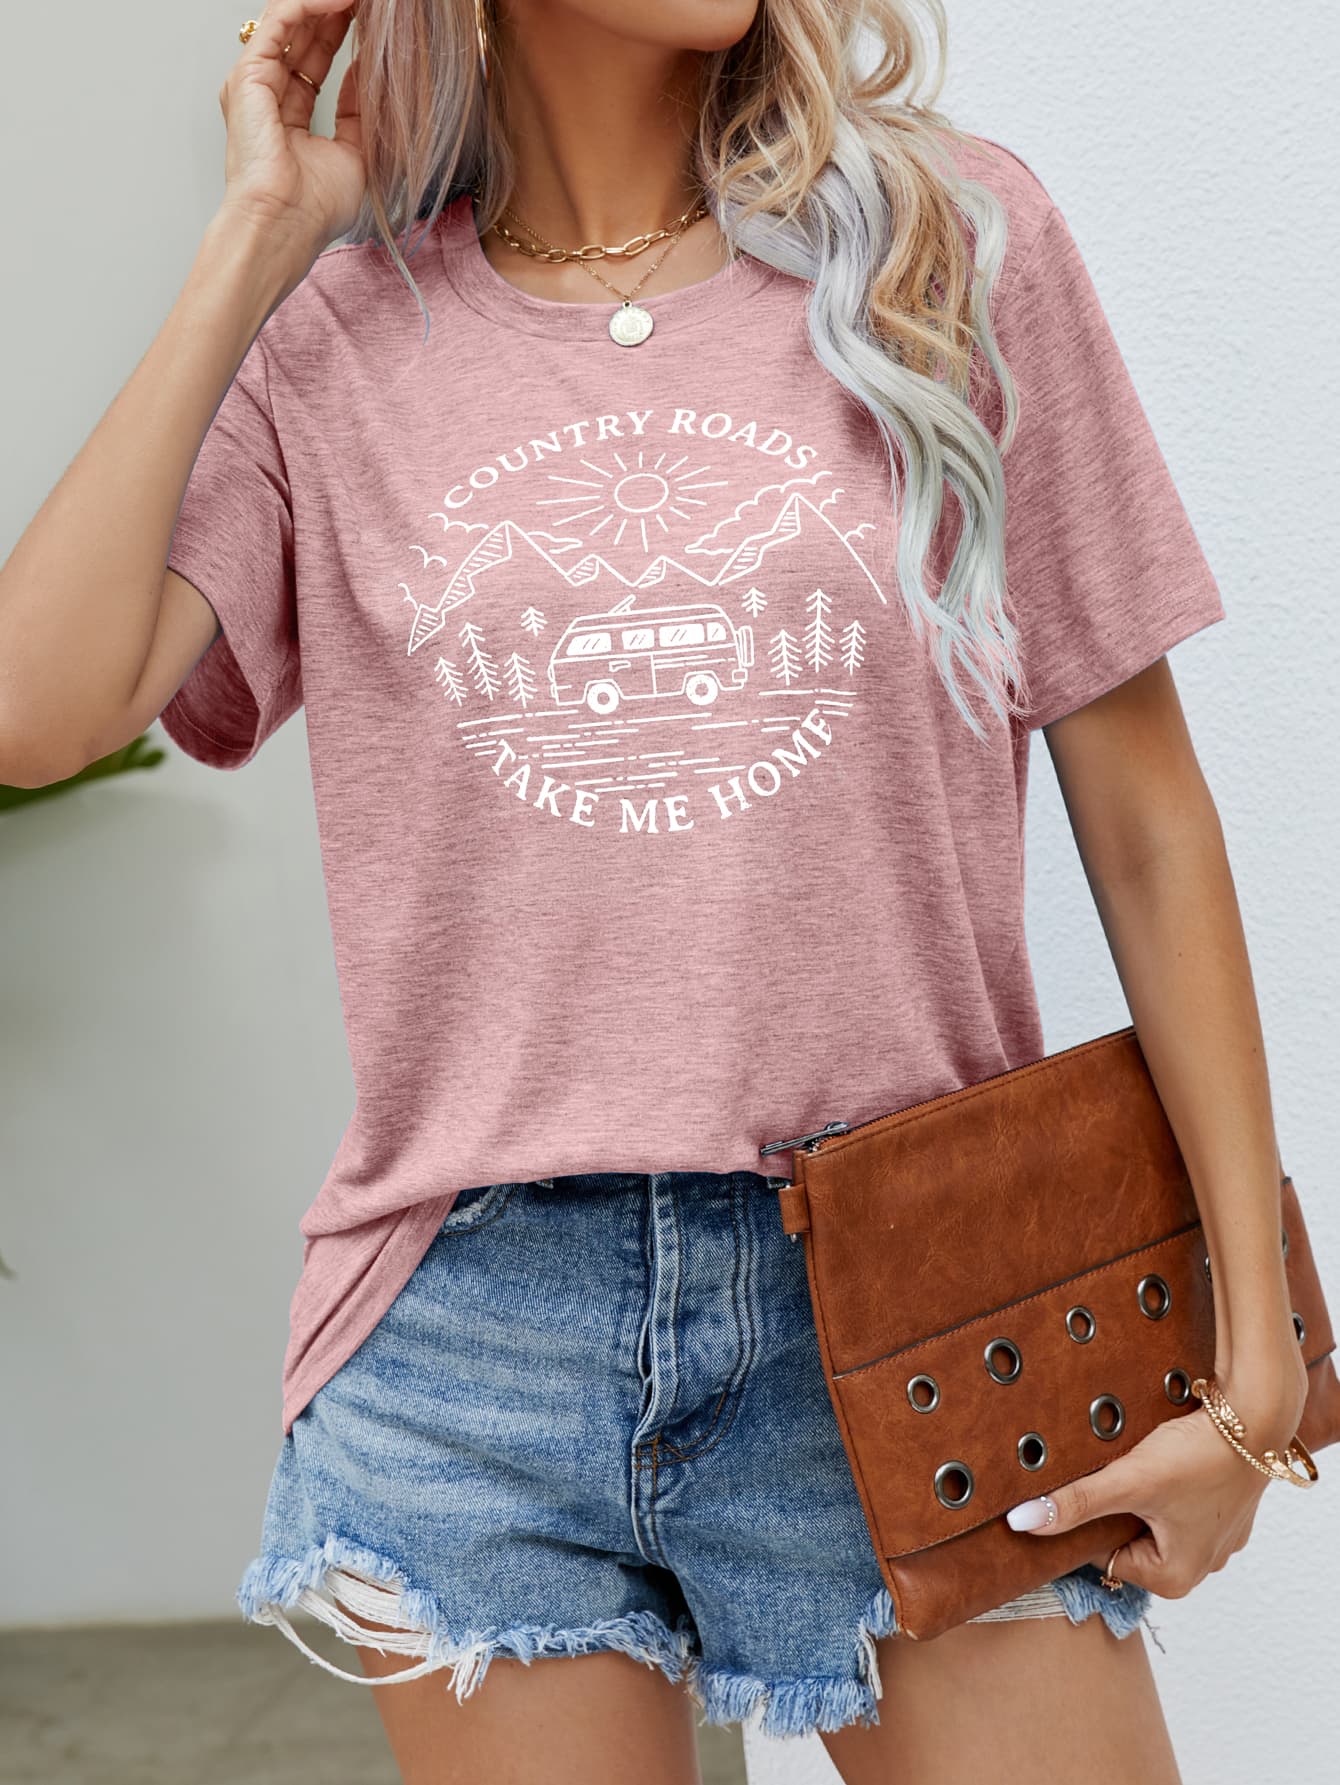 COUNTRY ROADS TAKE ME HOME Graphic Tee (5 Colors)  Krazy Heart Designs Boutique Blush Pink S 